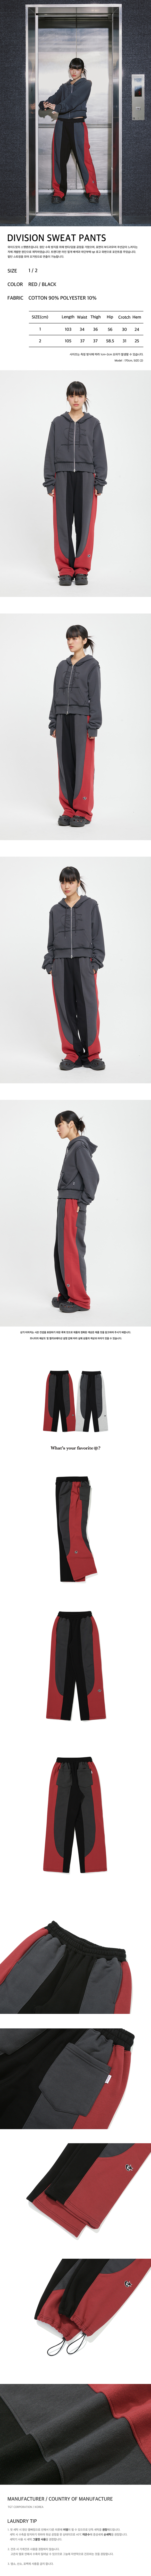 DIVISION SWEAT PANTS_RED